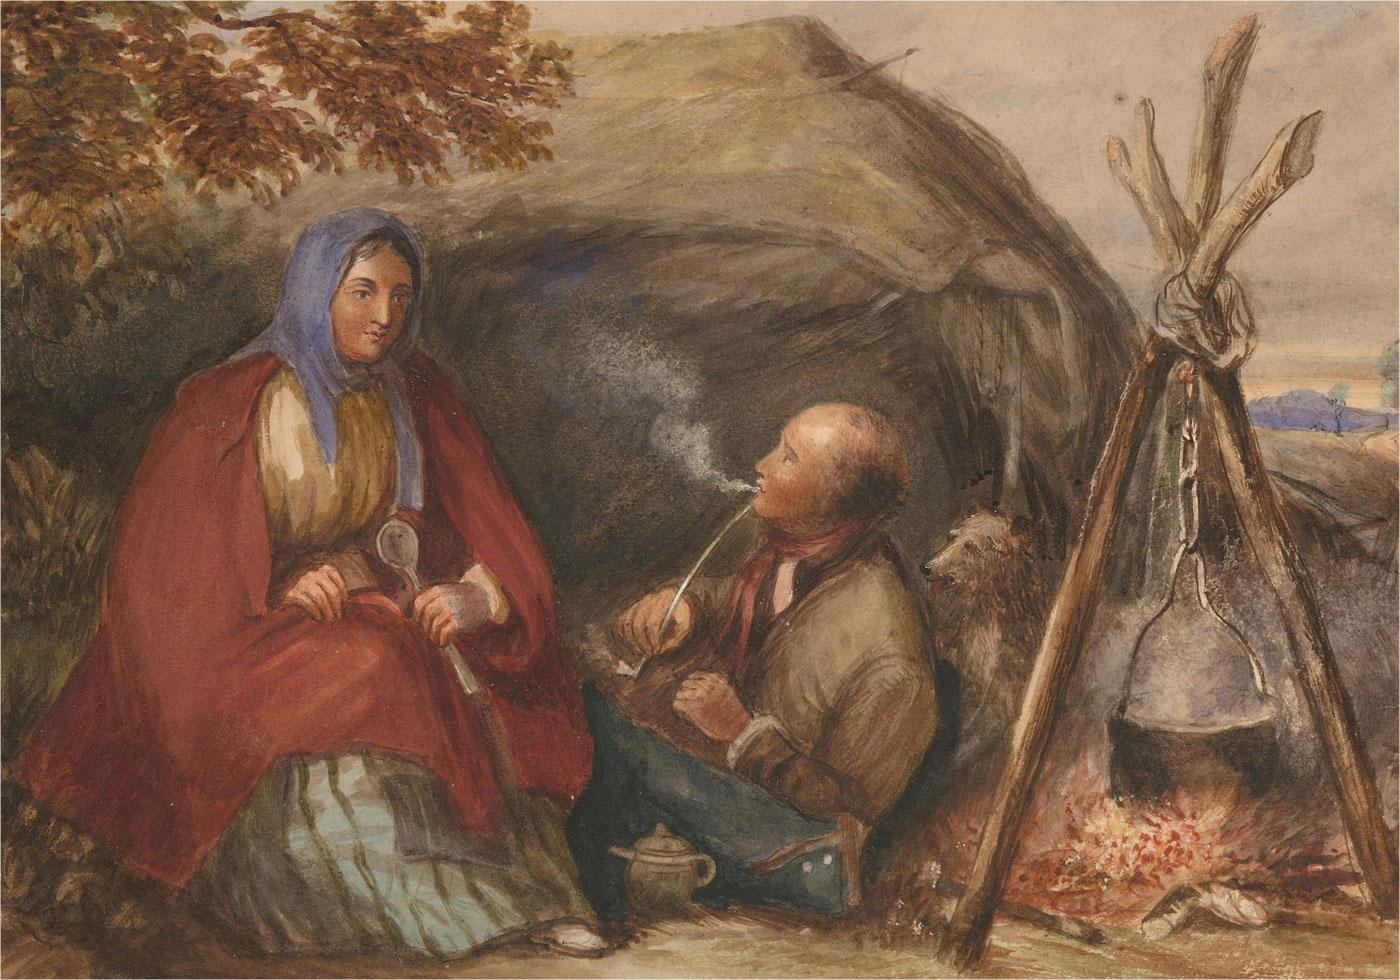 A fine watercolour study capturing two travellers camping beside a fire, as they wait for dinner to cook. Their dog peeks out from behind the gentleman, warming himself by the fire. Unsigned. On watercolour paper.